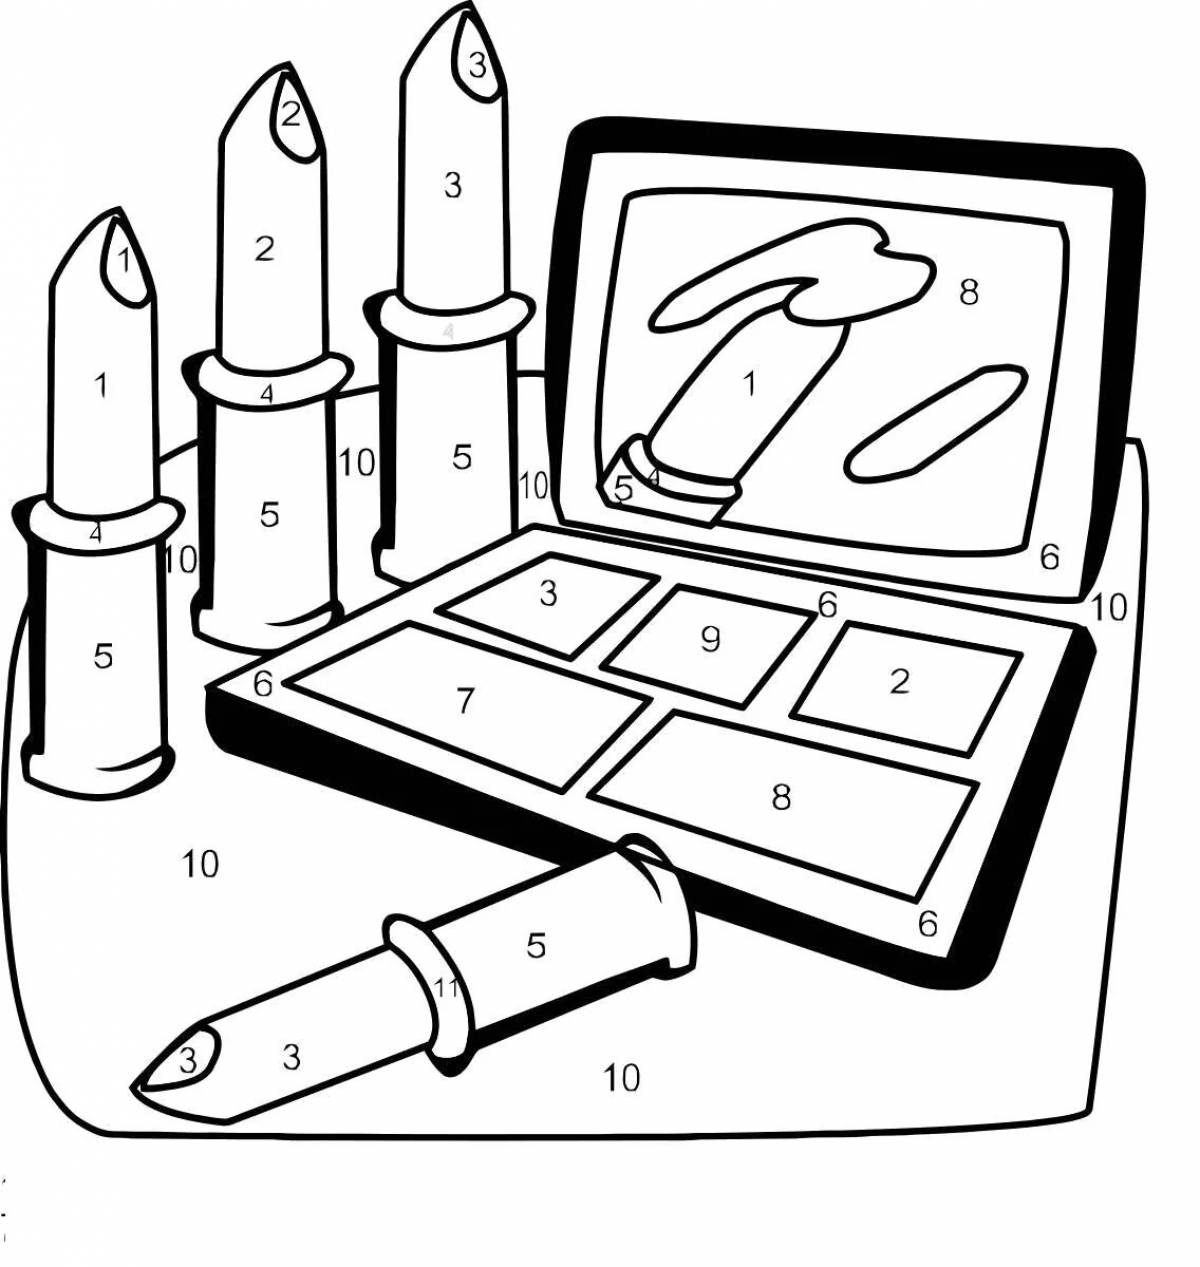 Animated nail polish coloring page for kids